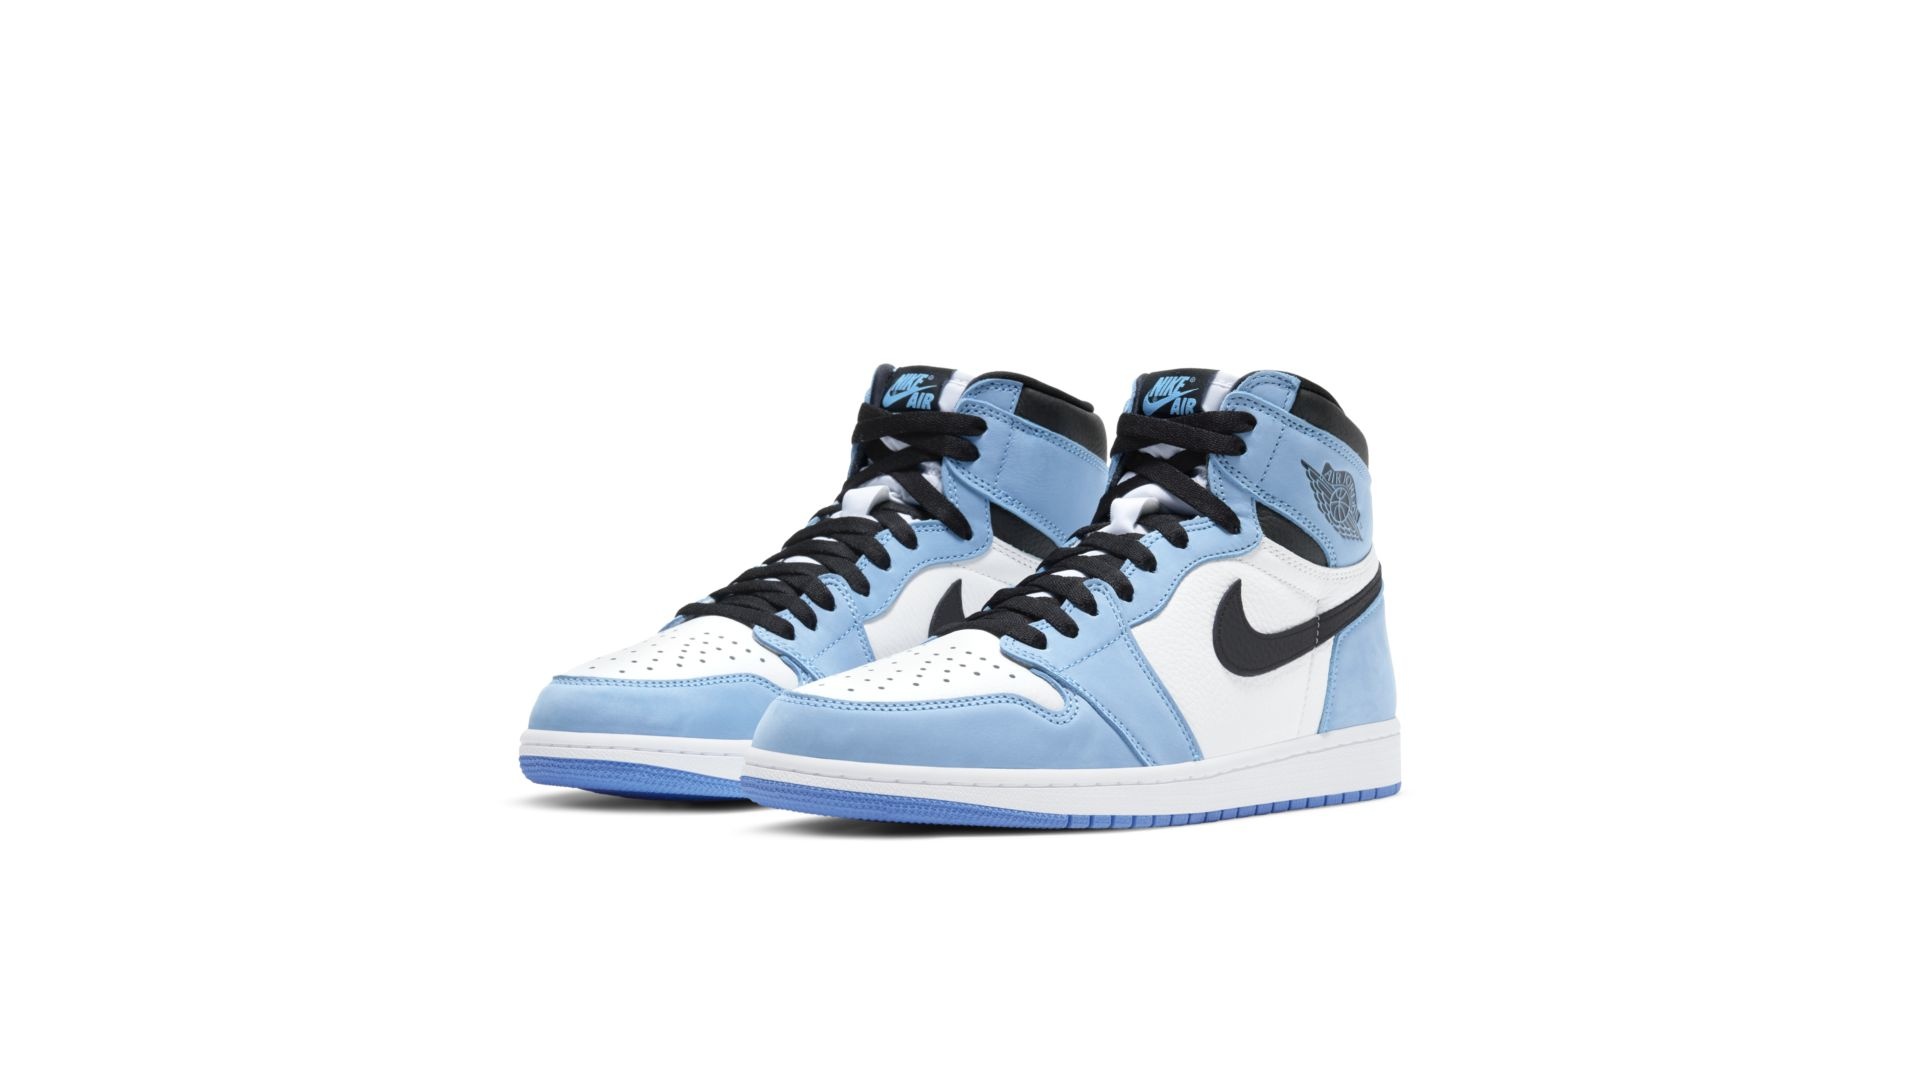 blue and white high top jordans